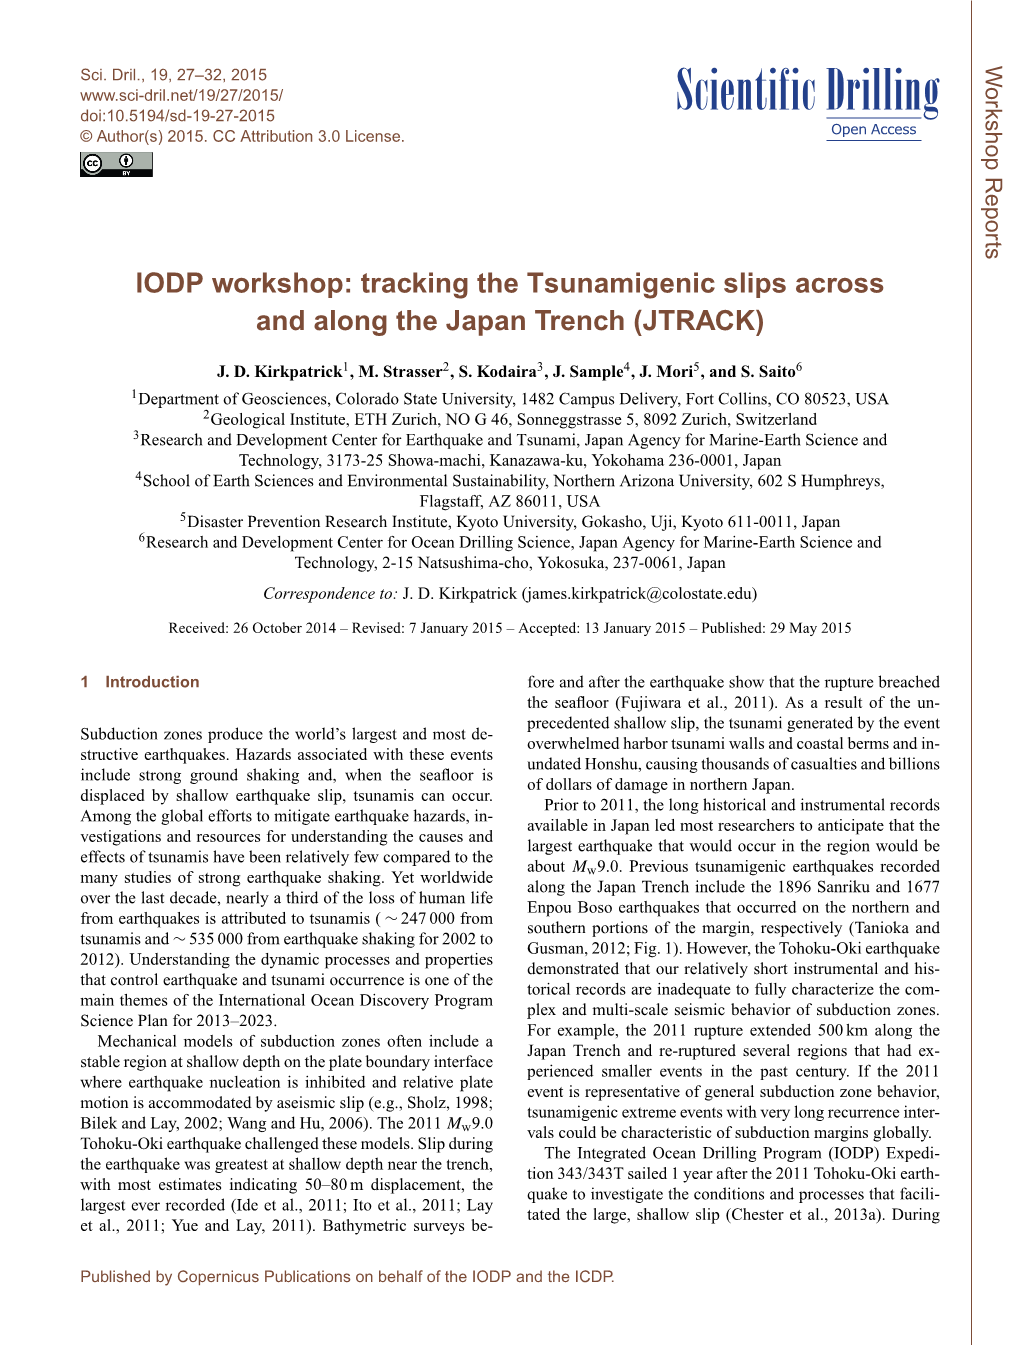 Tracking the Tsunamigenic Slips Across and Along the Japan Trench (JTRACK)